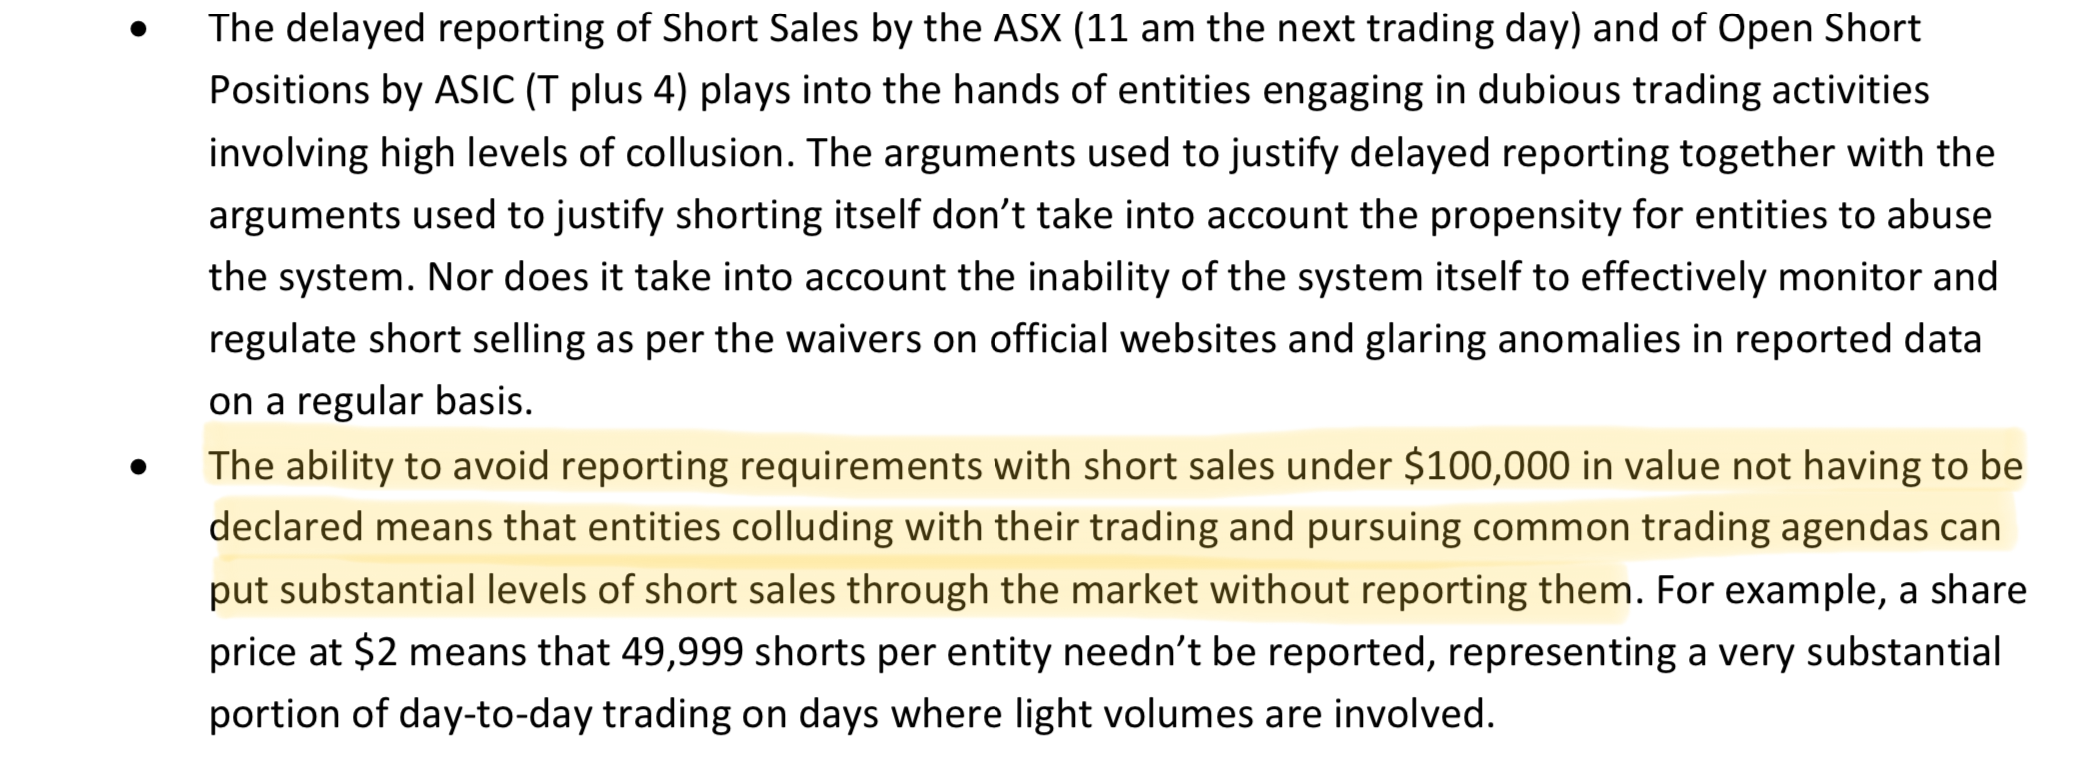 No requirement to report shorts under $100,000.png